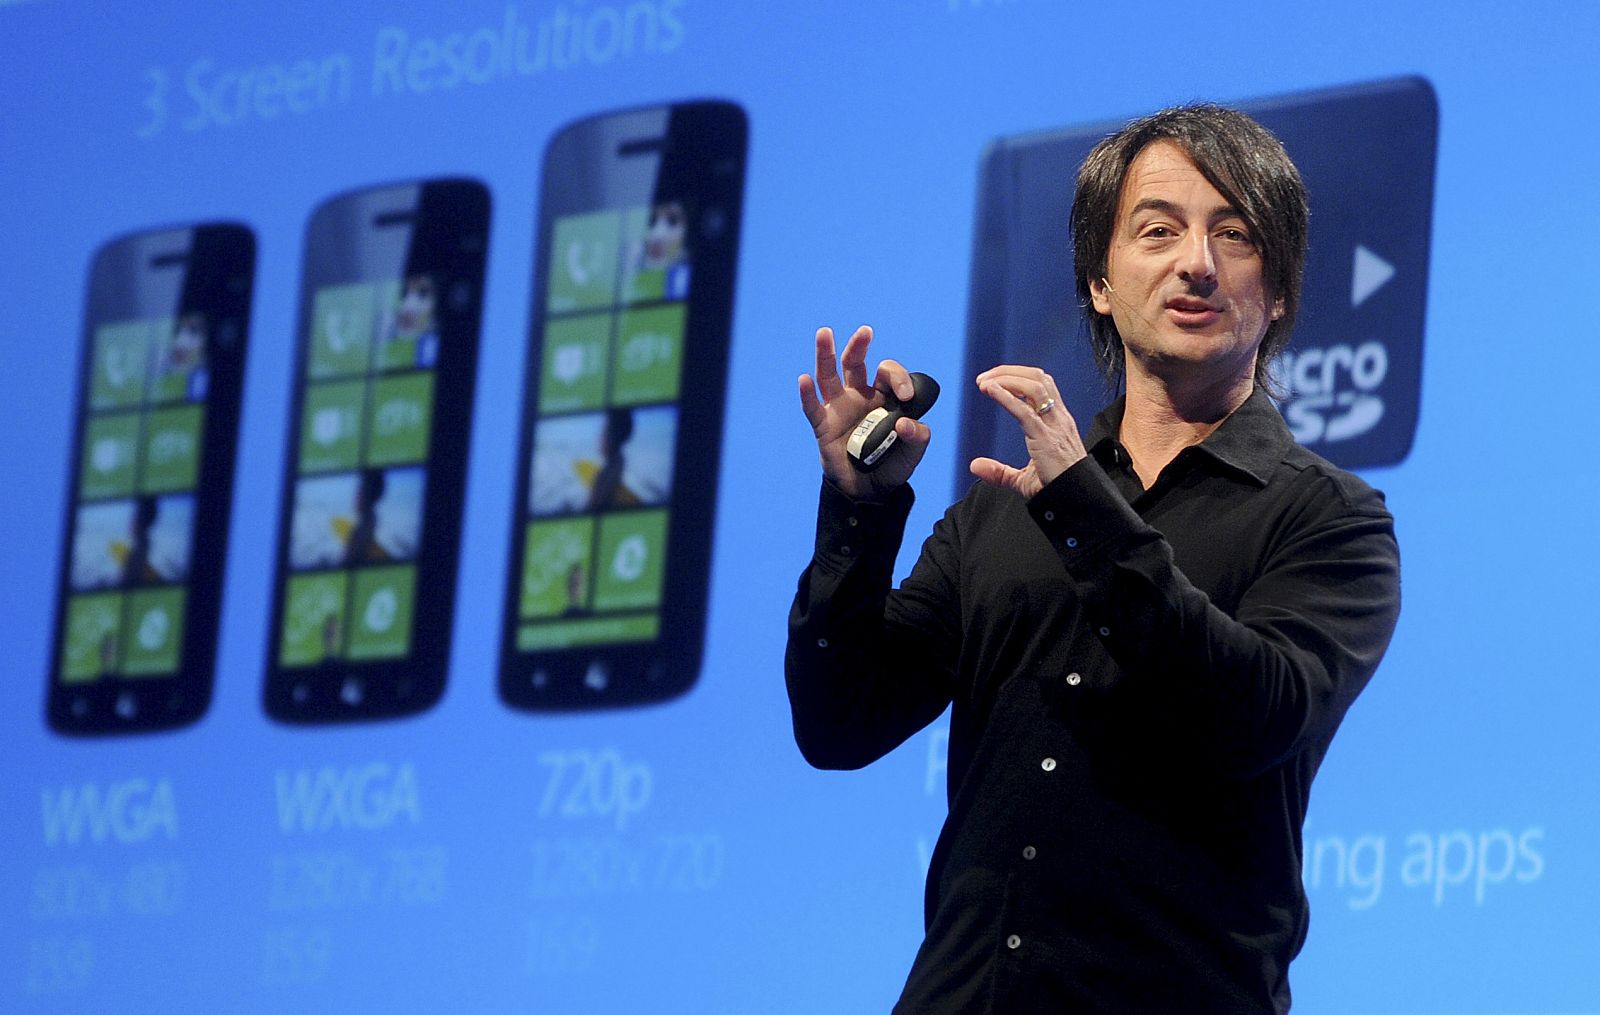 Joe Belfiore, corporate vice president of Microsoft, introduces the Windows Phone 8 mobile operating system in San Francisco